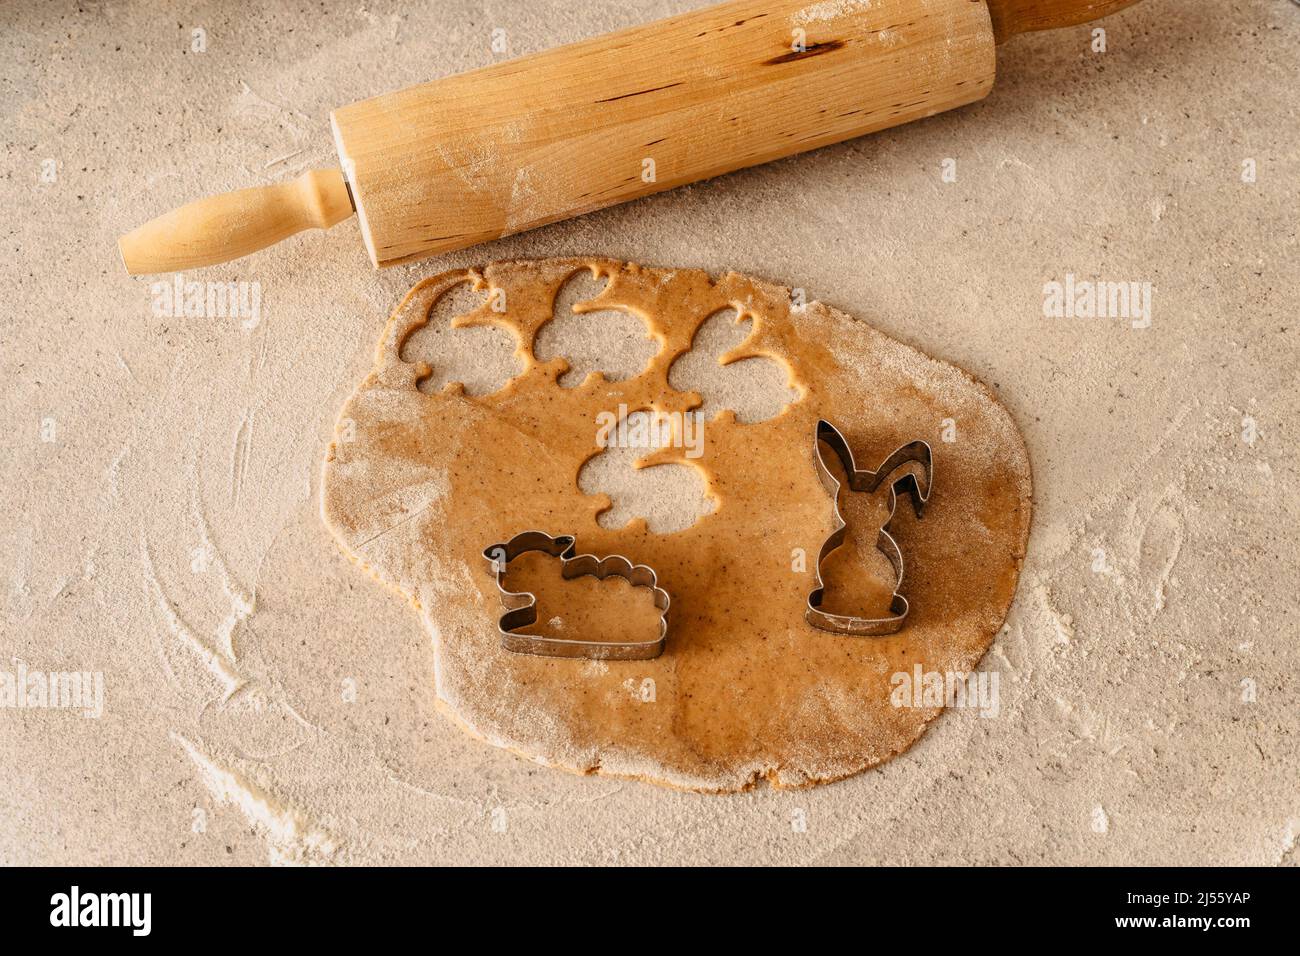 Easter baking flat lay.Spring symbols made from gingerbread.Homemade cookies.Easter bunny,rabbit,eggs and ducks from delicious honey dough.Happy Easte Stock Photo